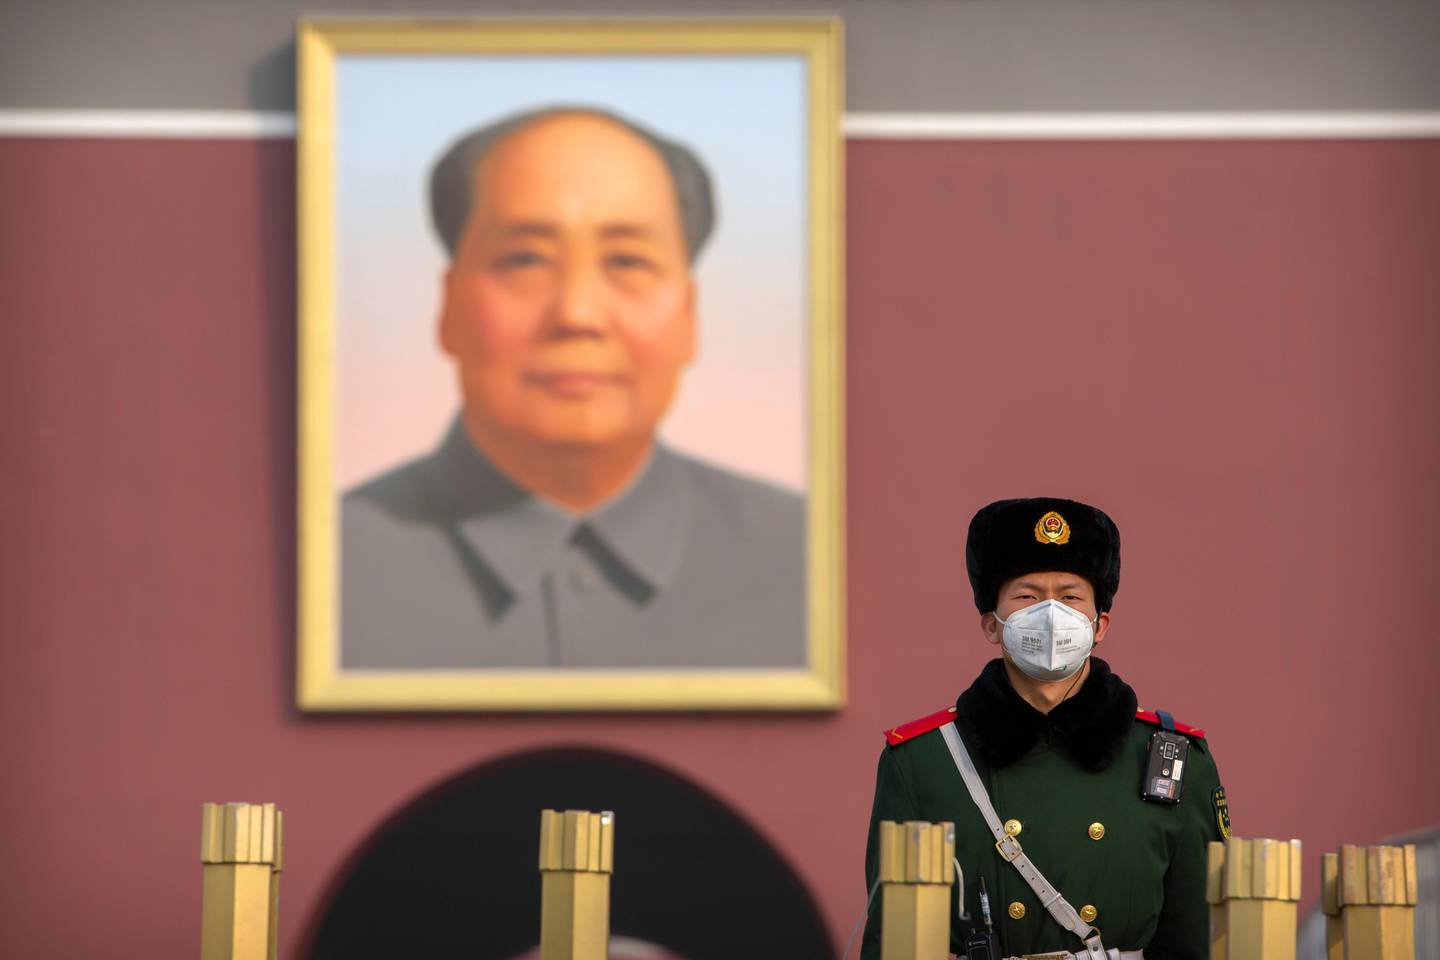 A paramilitary policeman wears a face mask as he stands guard near the large portrait of Chinese leader Mao Zedong at Tiananmen Gate adjacent to Tiananmen Square in Beijing, Monday, Jan. 27, 2020. China on Monday expanded sweeping efforts to contain a viral disease by postponing the end of this week's Lunar New Year holiday to keep the public at home and avoid spreading infection as the death toll rose to 80. (AP Photo/Mark Schiefelbein)